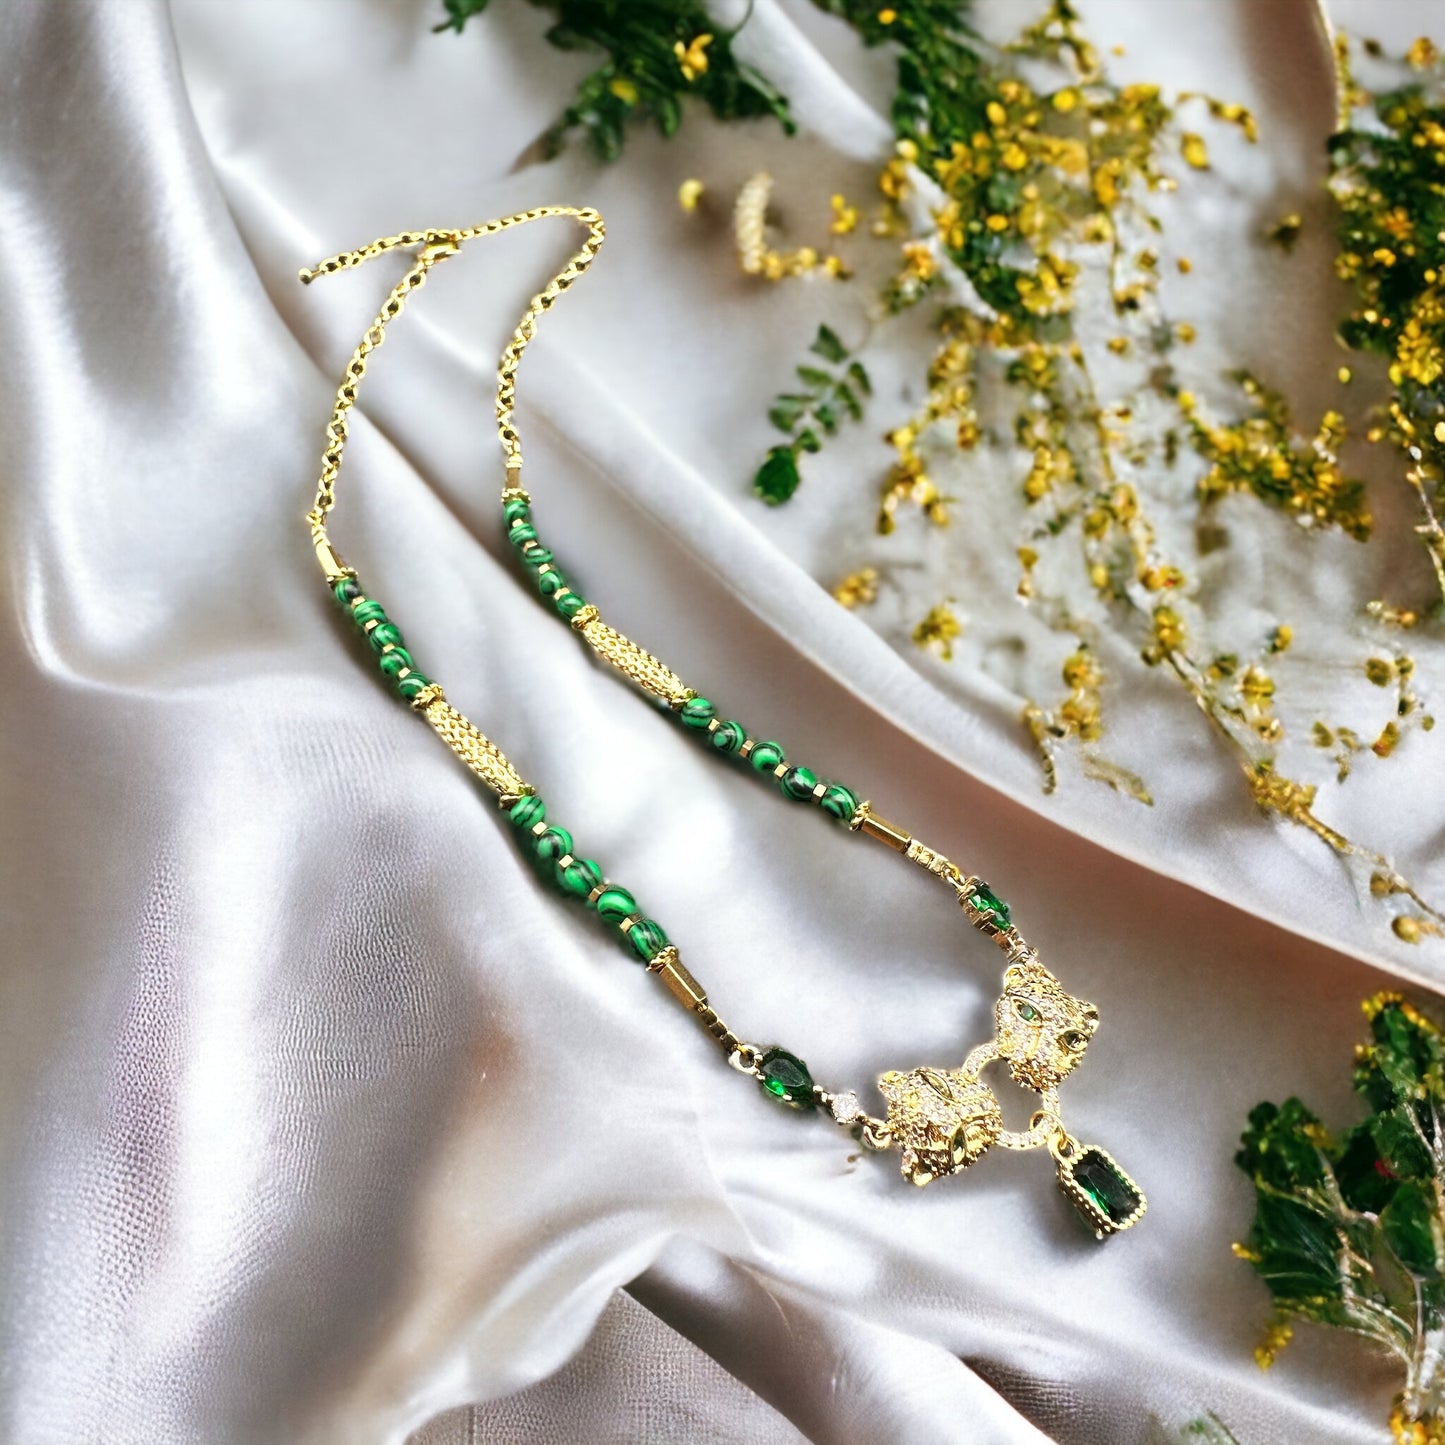 Éclat Nocturne - 18k Gold Plated Leopard necklace with malachite stones and cubic zirconia